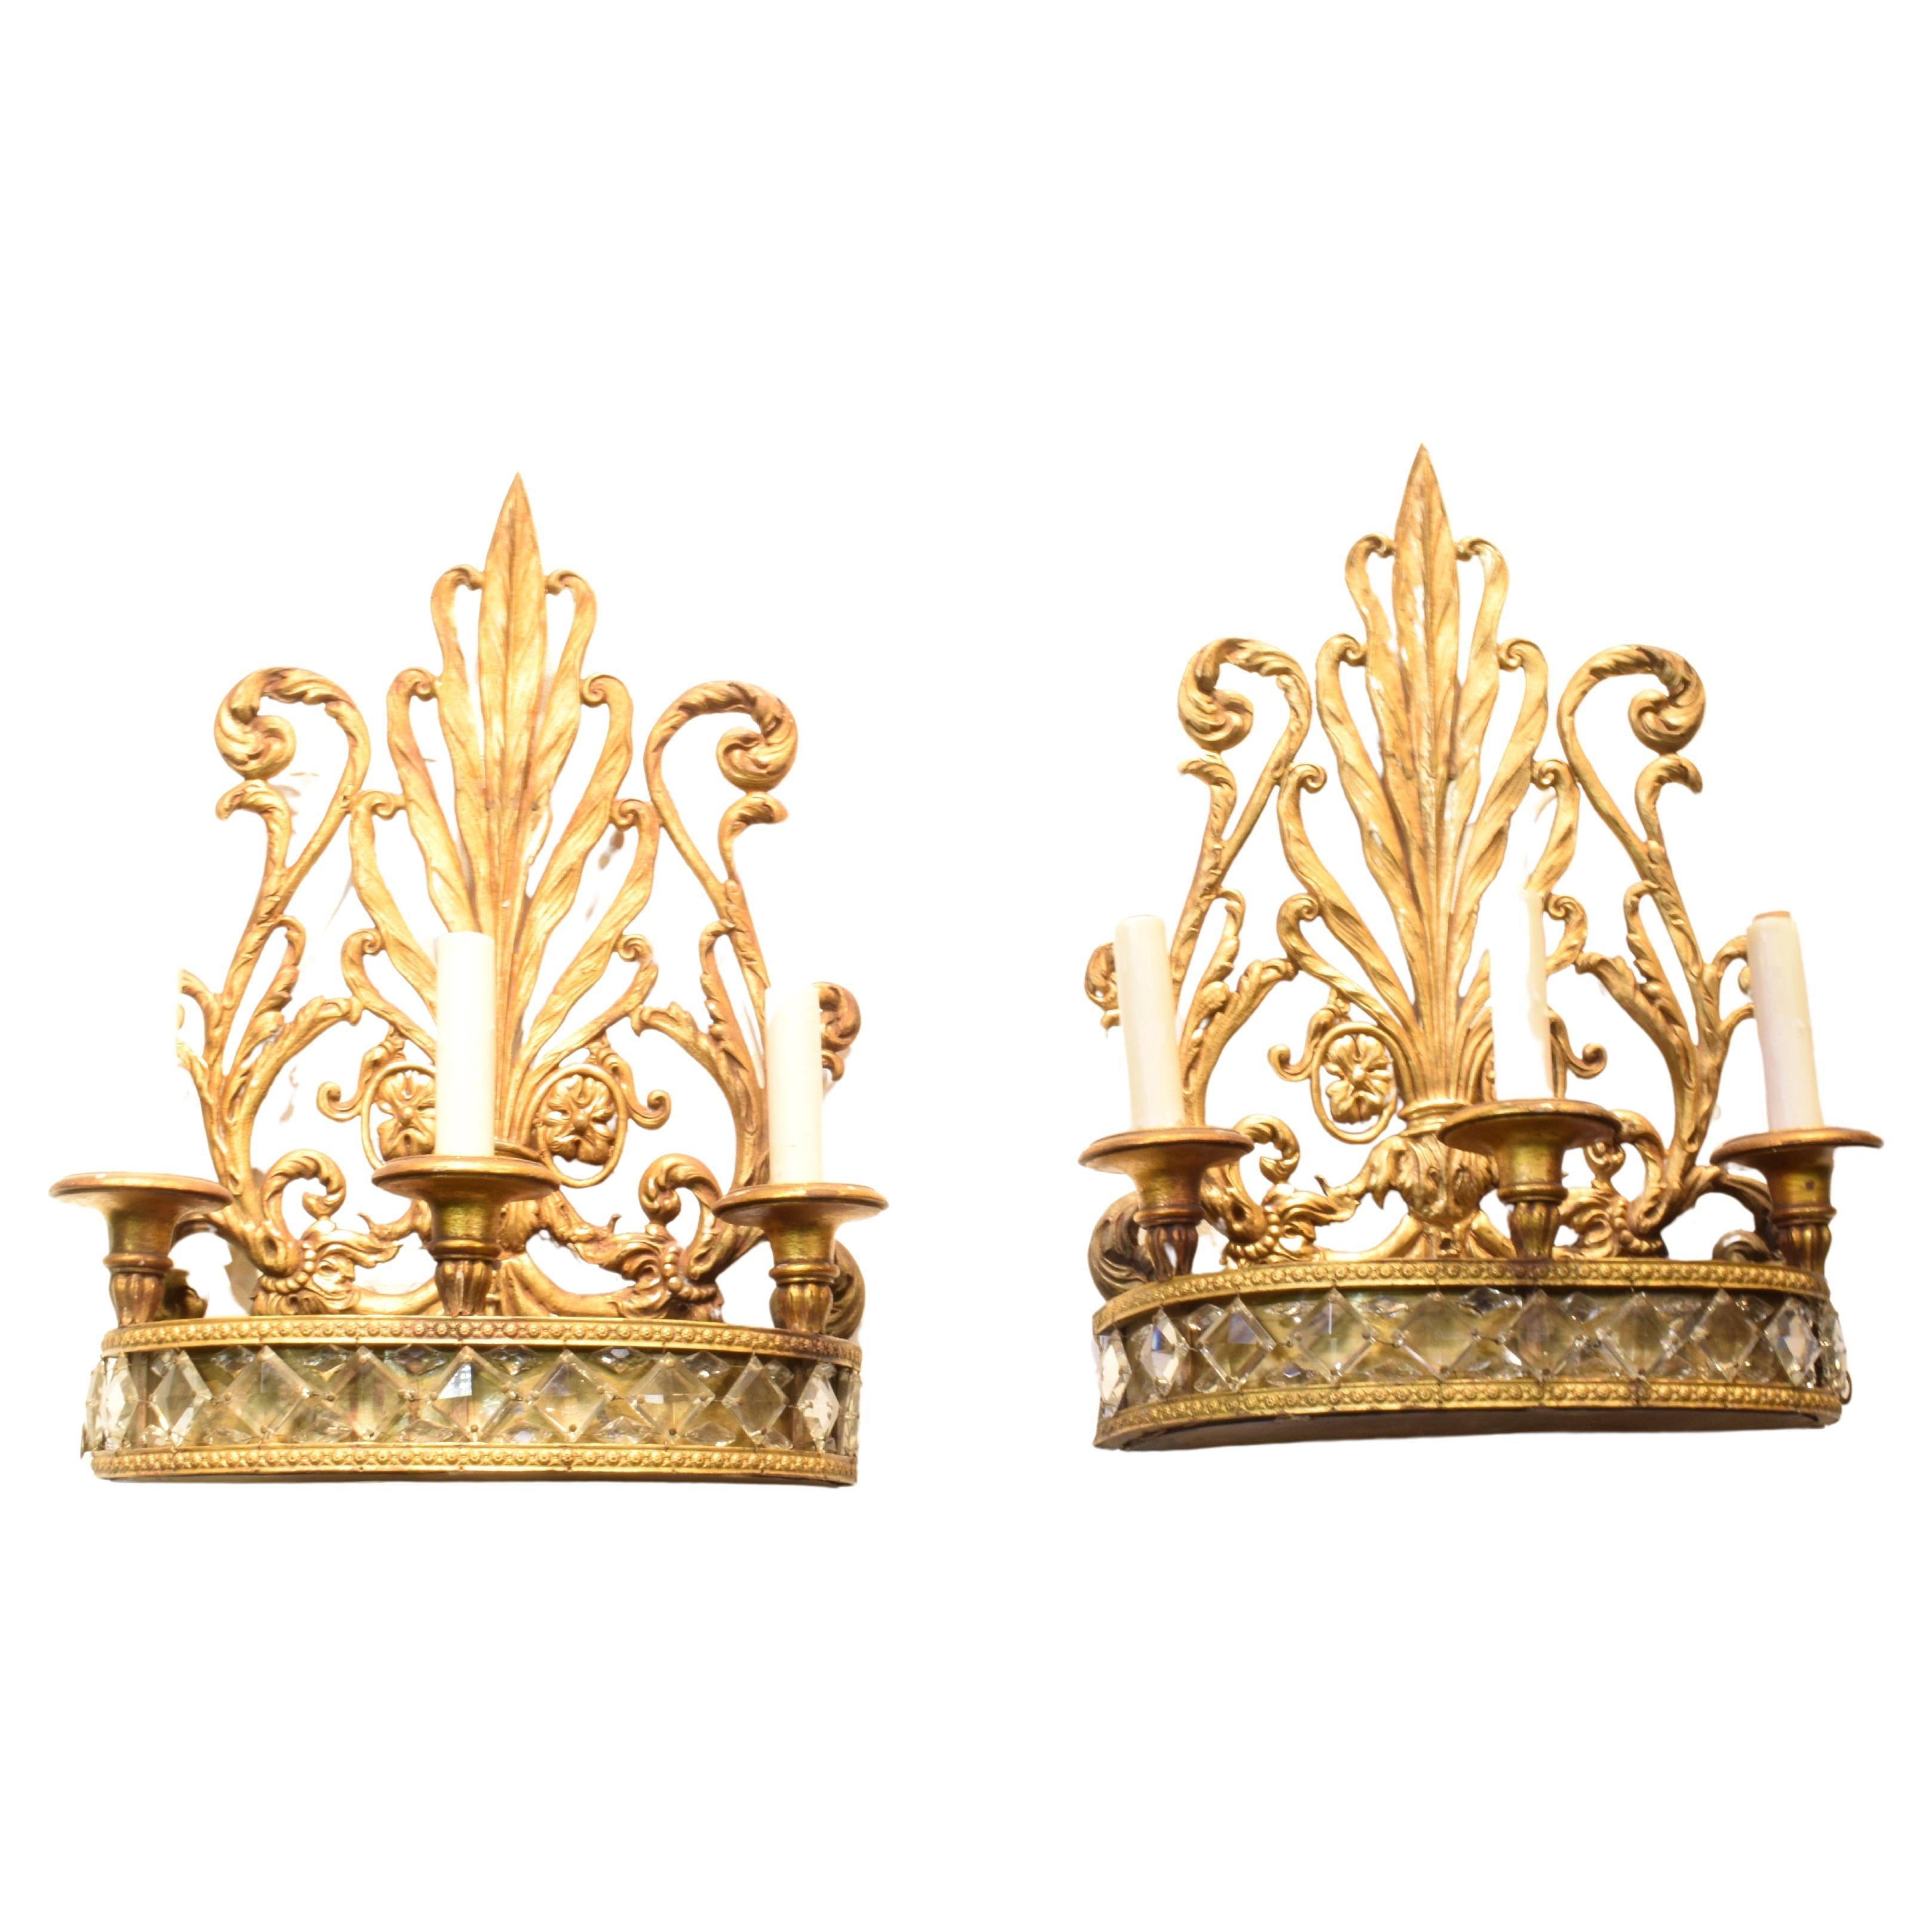 Pair of Wall Sconces attributed to Caldwell For Sale